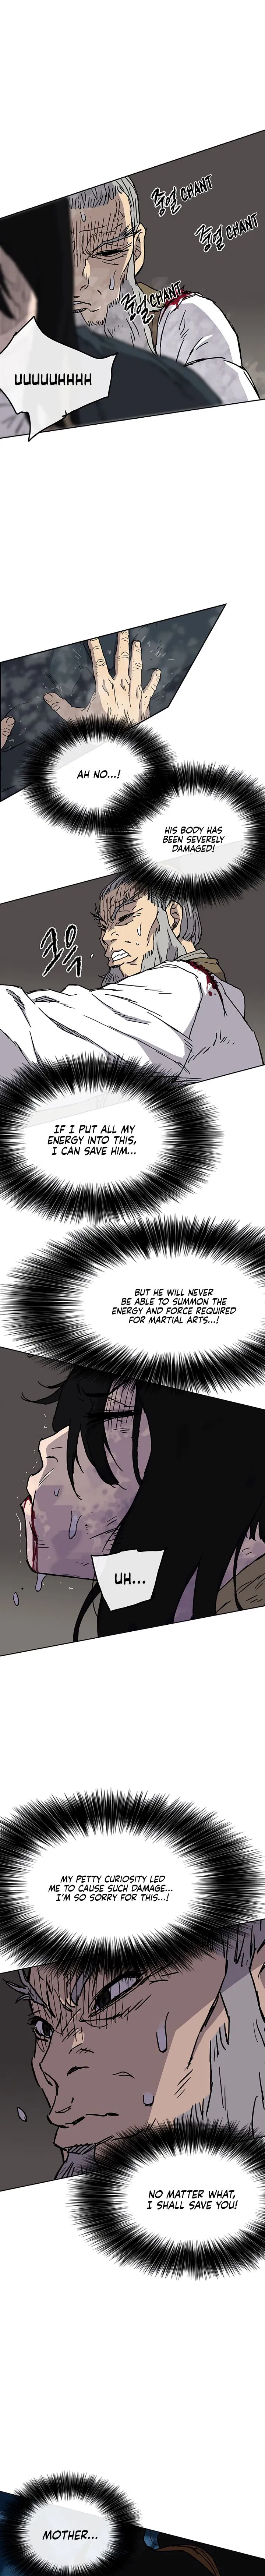 The Undefeatable Swordsman Chapter 005 page 20